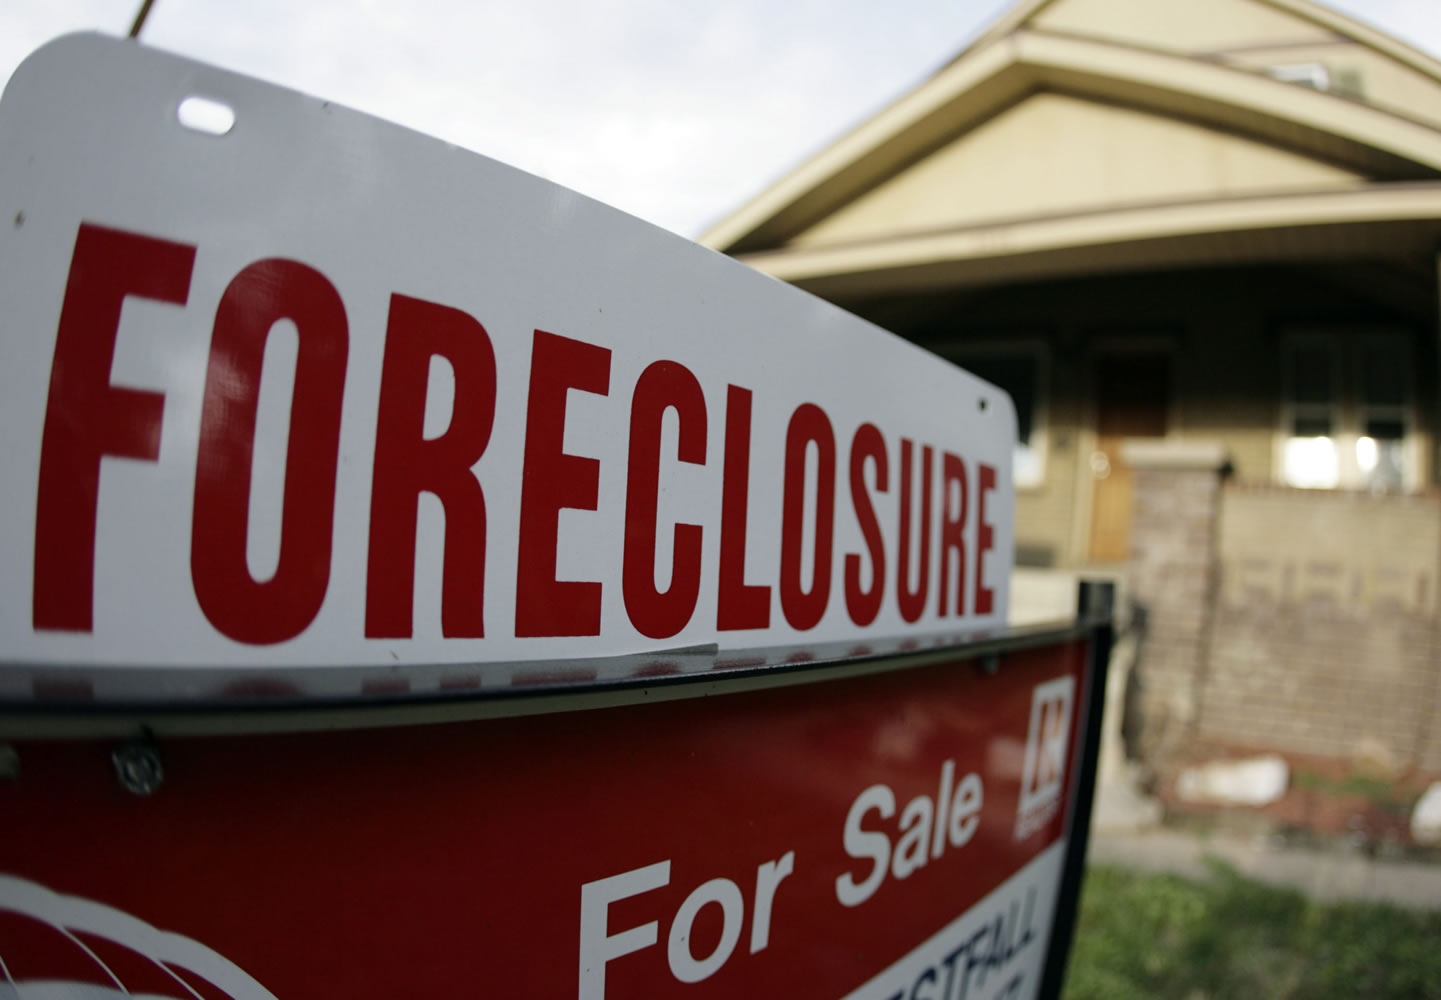 Distressed Clark County homeowners have not been as lucky in avoiding foreclosure over the past five months, according to local housing experts and national data released on Thursday.